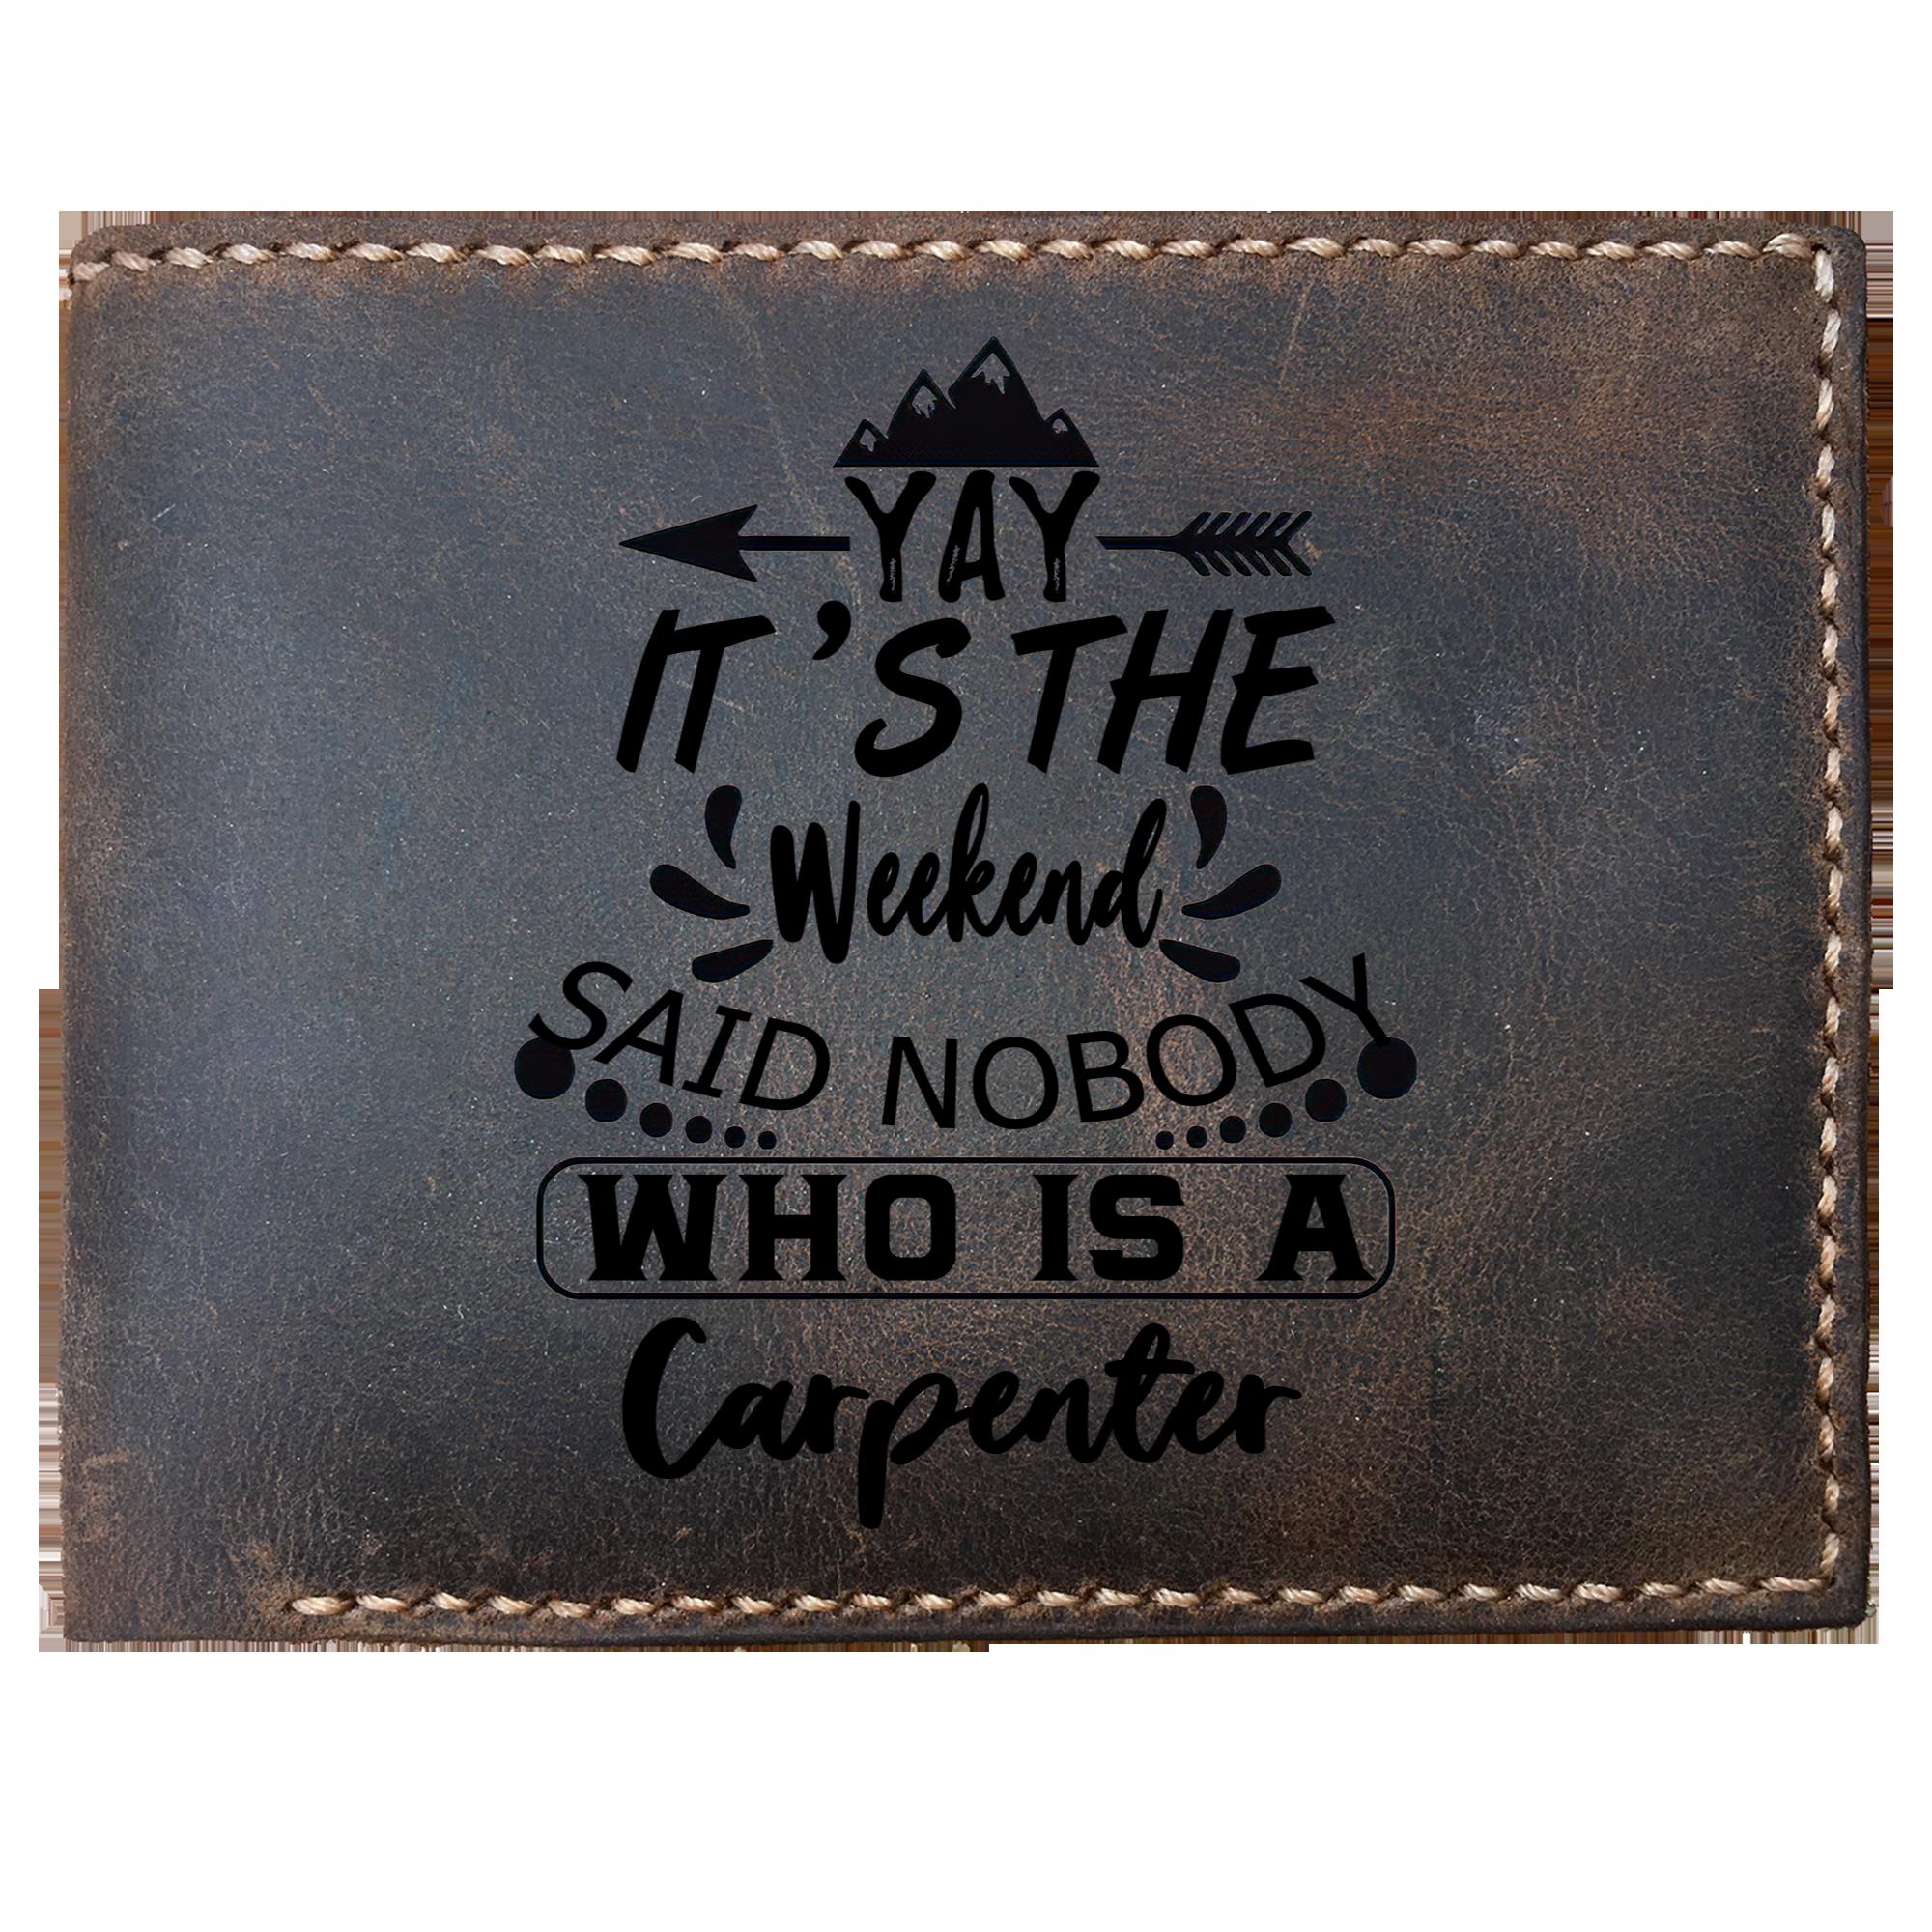 Skitongifts Funny Custom Laser Engraved Bifold Leather Wallet For Men, It's The Weekend Said Nobody Who Is A Carpenter, Father's Day Gifts